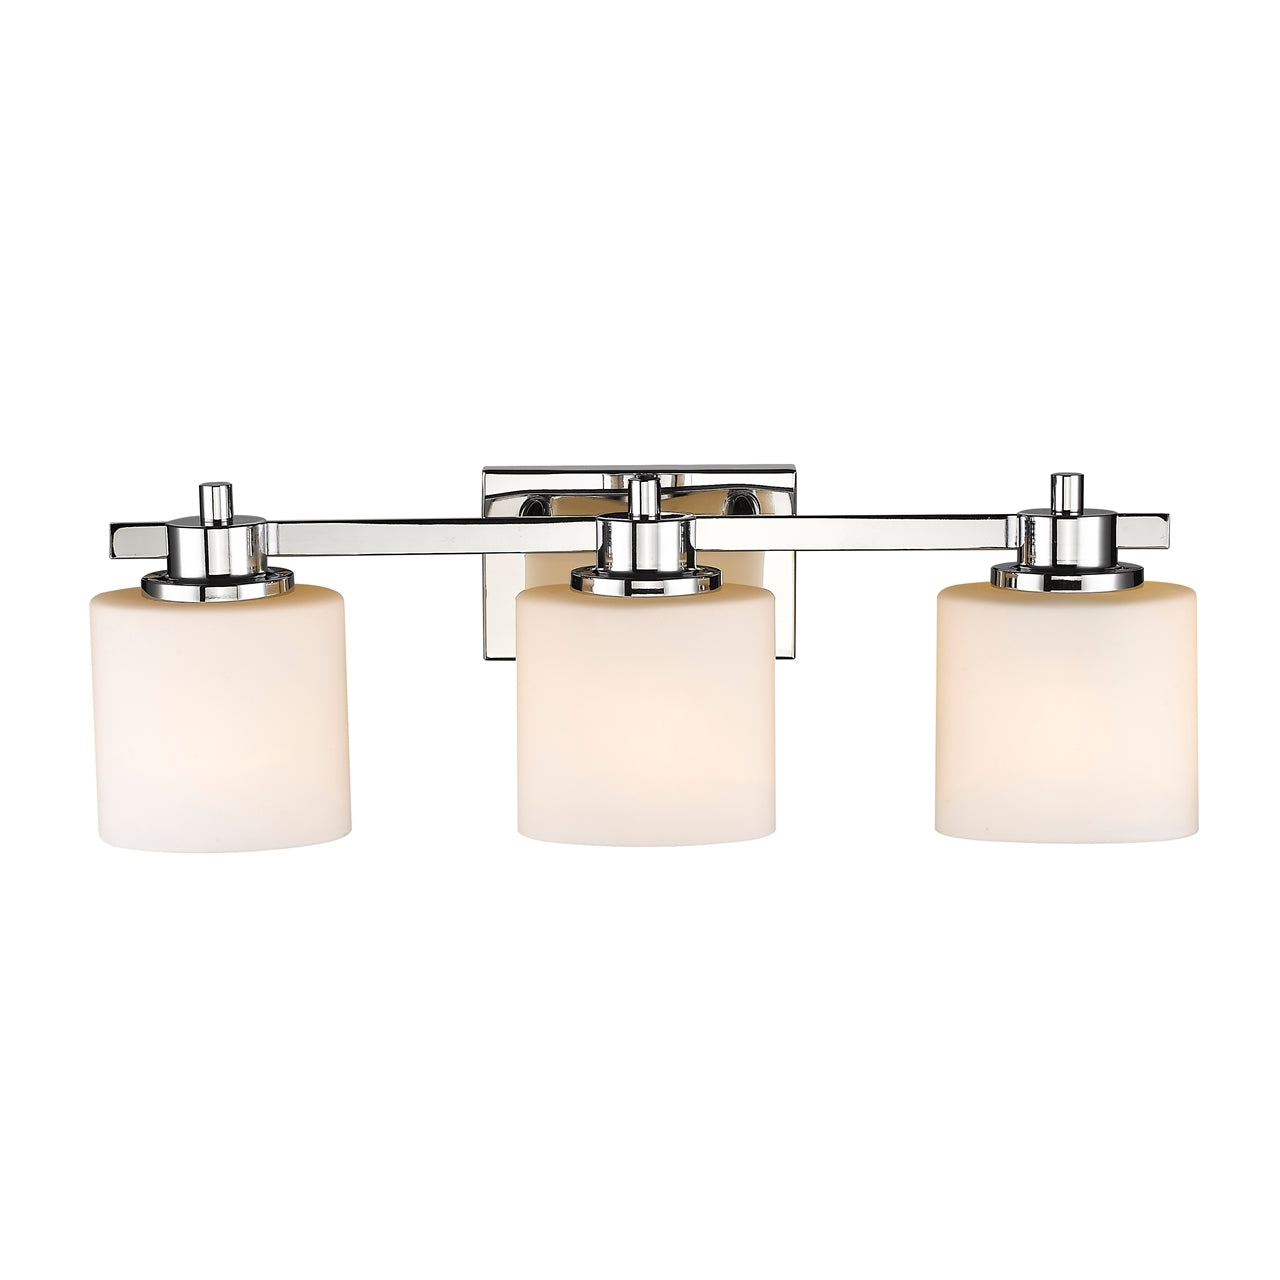 SOLBI Contemporary 3 Light Chrome Finish Bath Vanity Wall Fixture White Alabaster Glass 24" Wide